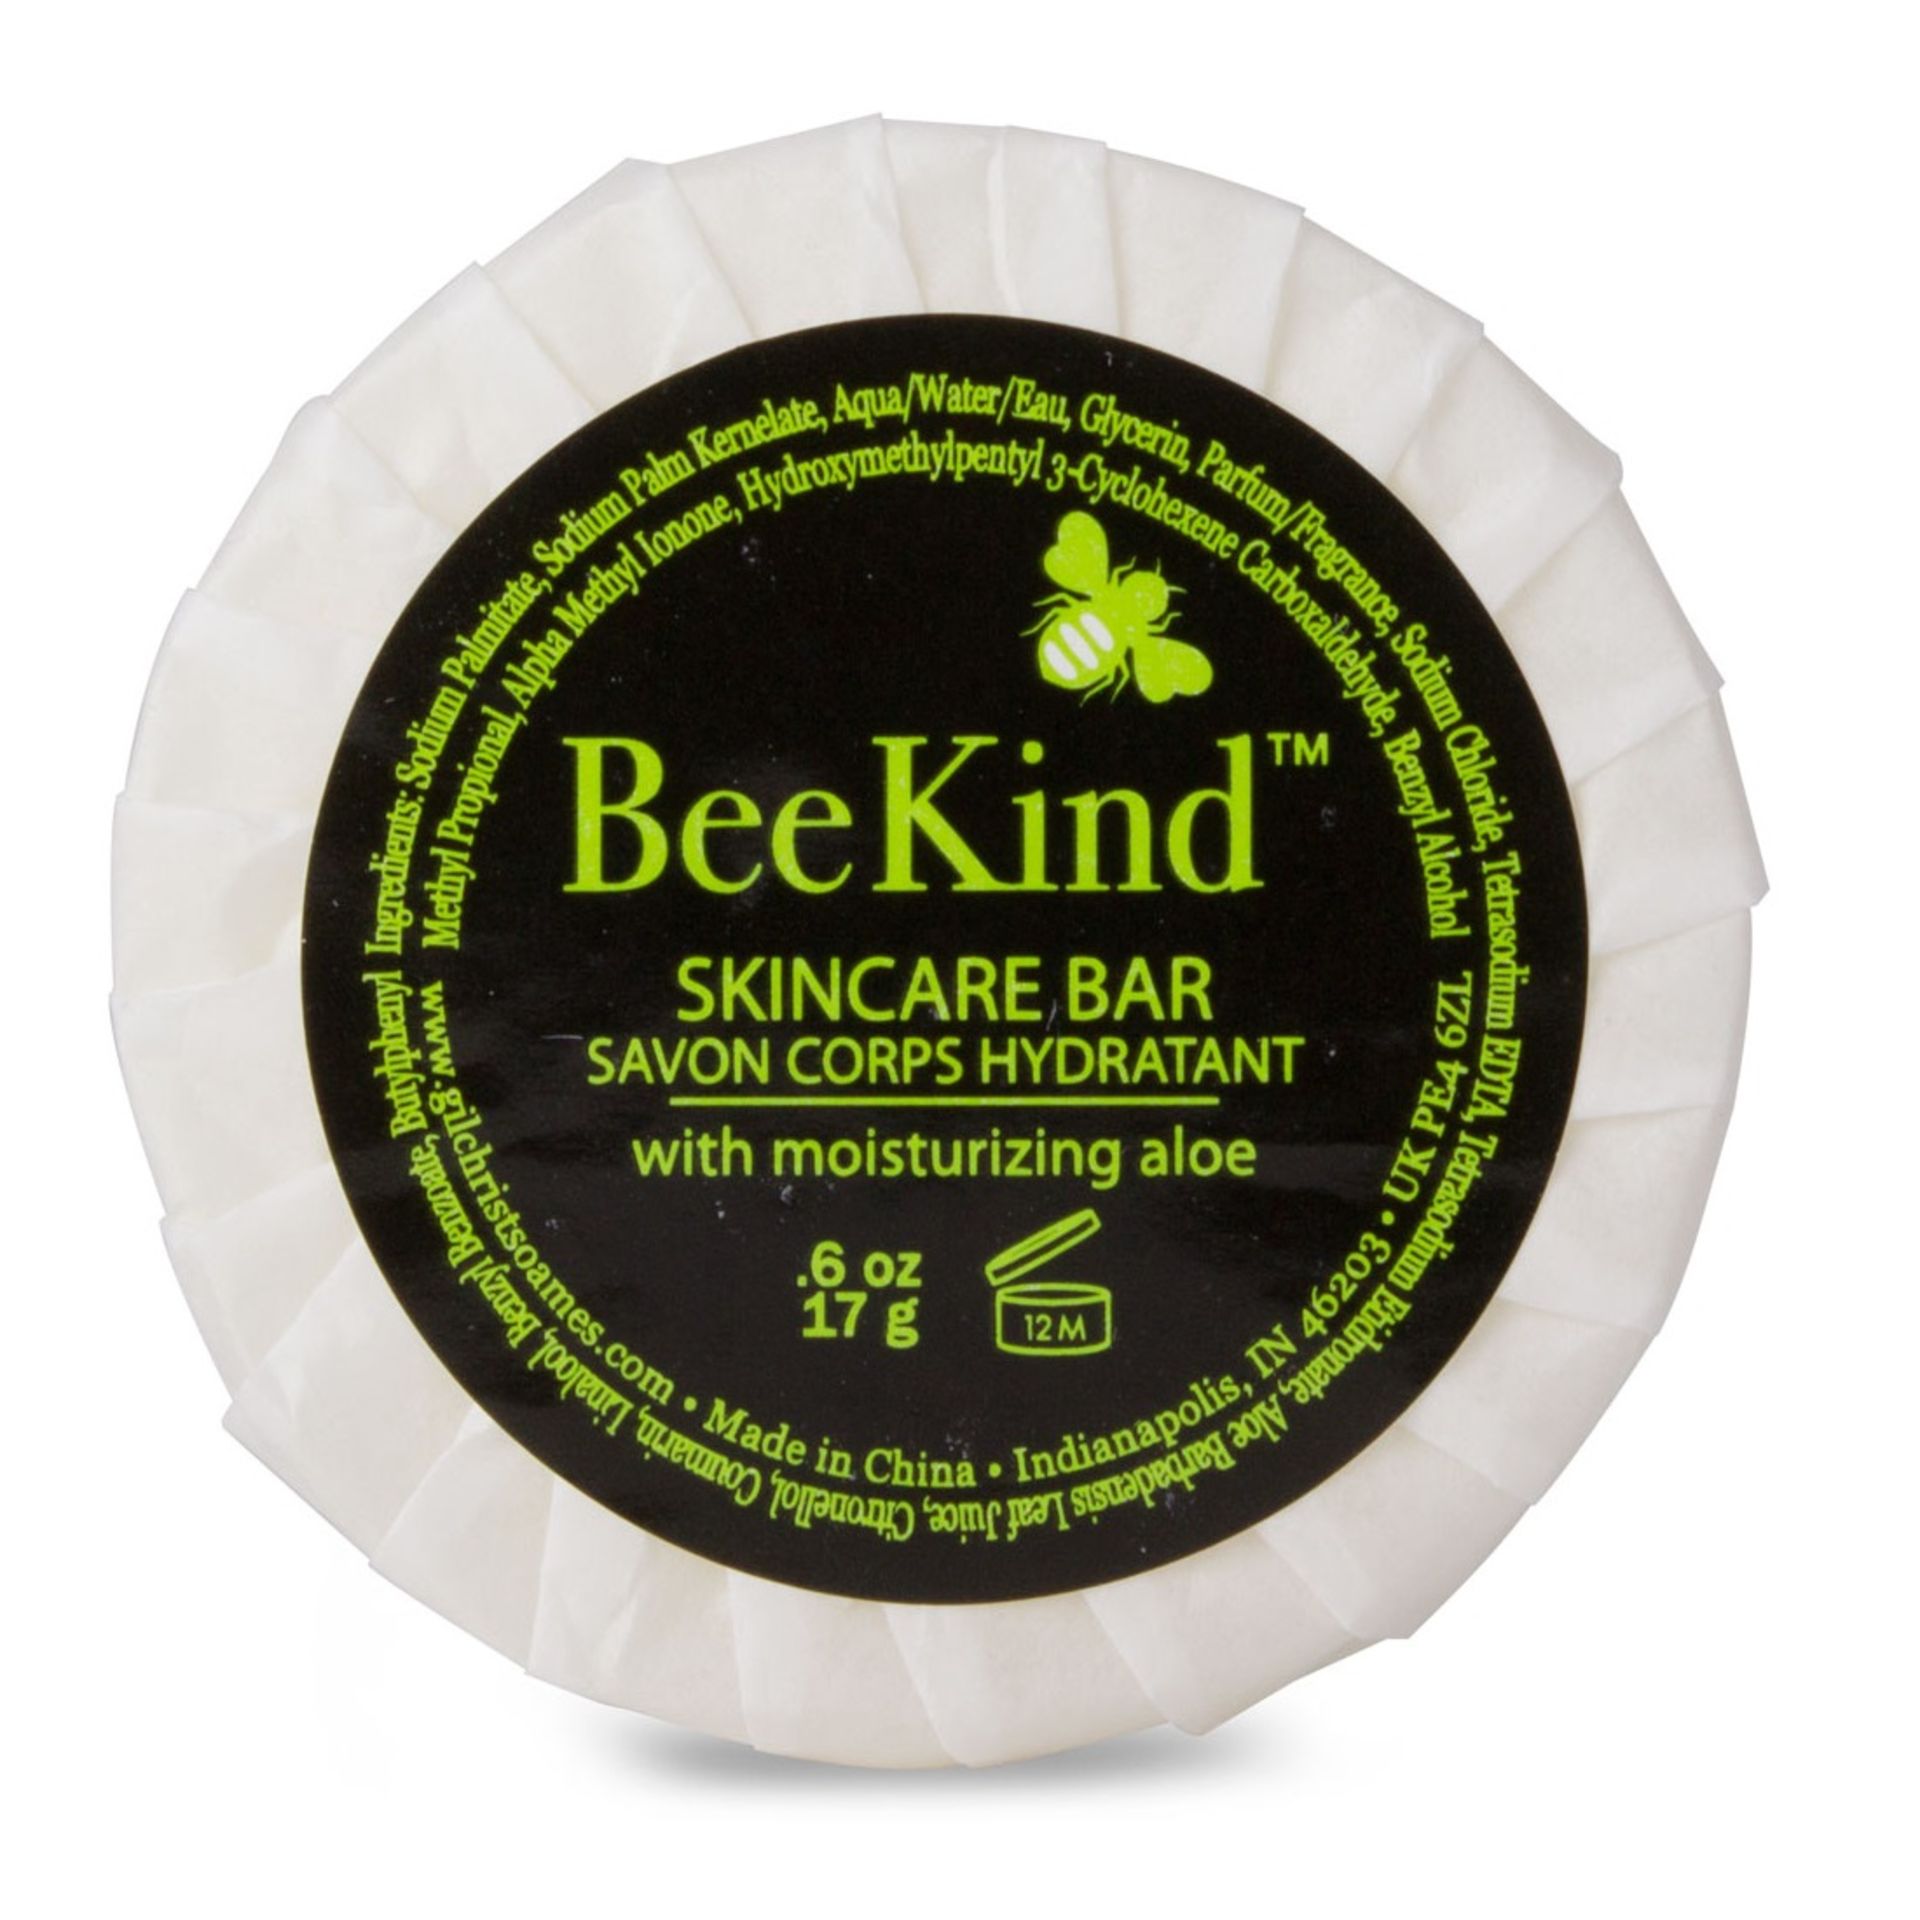 100 x BeeKind Skin Care Bars with Aloe by Gilchrist & Soames Soap 17g ea. - Image 2 of 2